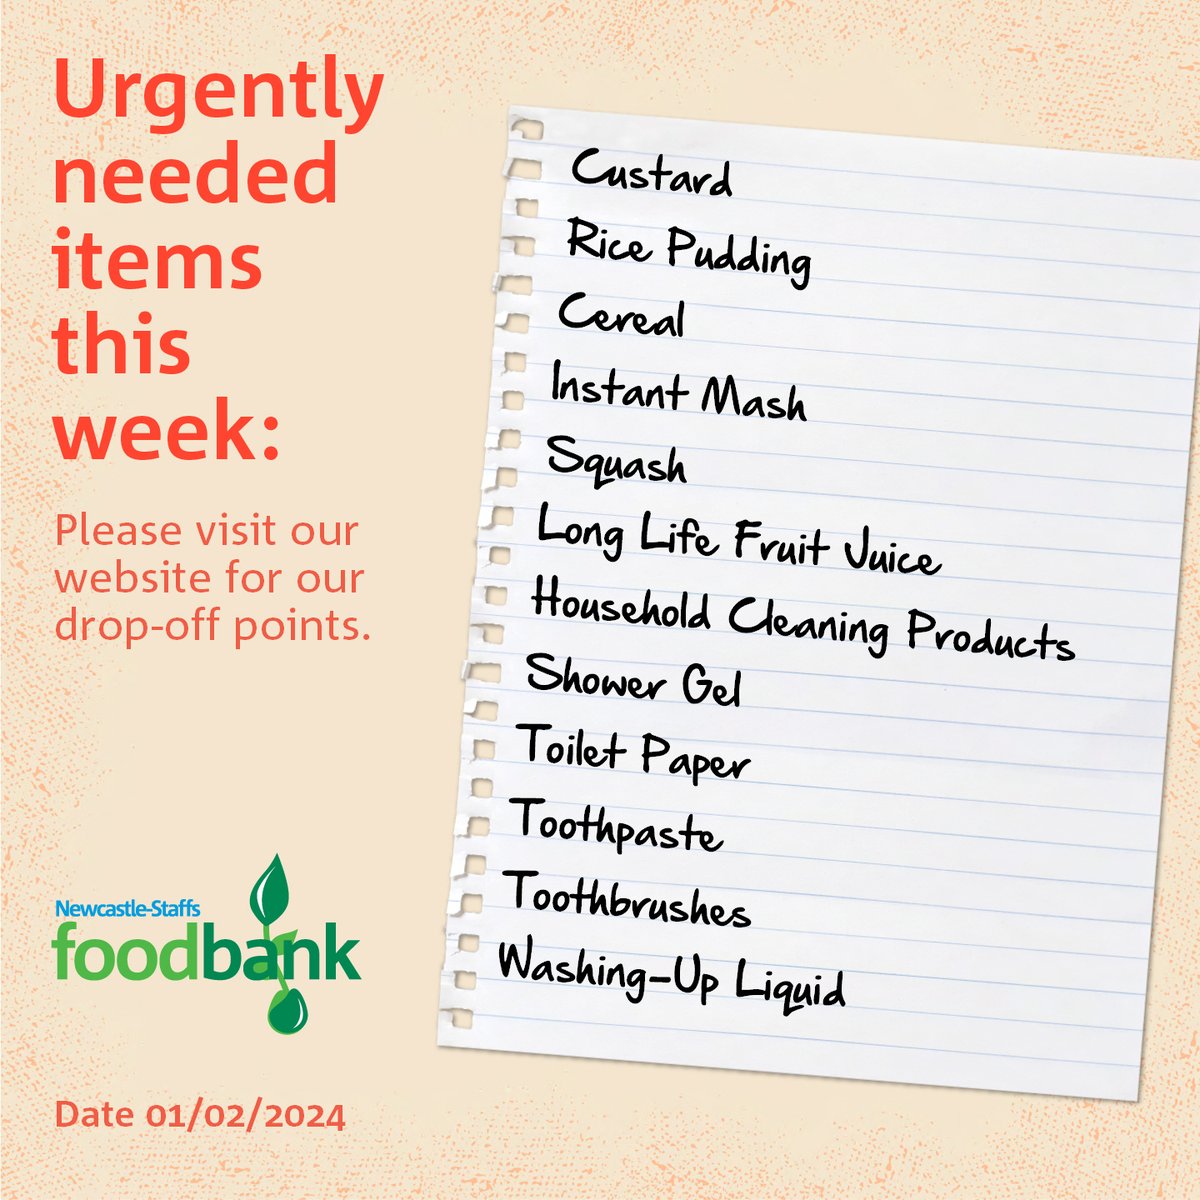 Looking to make a #foodbank donation? We rely on donations to provide vital help while working in the long-term towards a #HungerFreeFuture.

We are currently running low on the items listed below. Thank you!💚